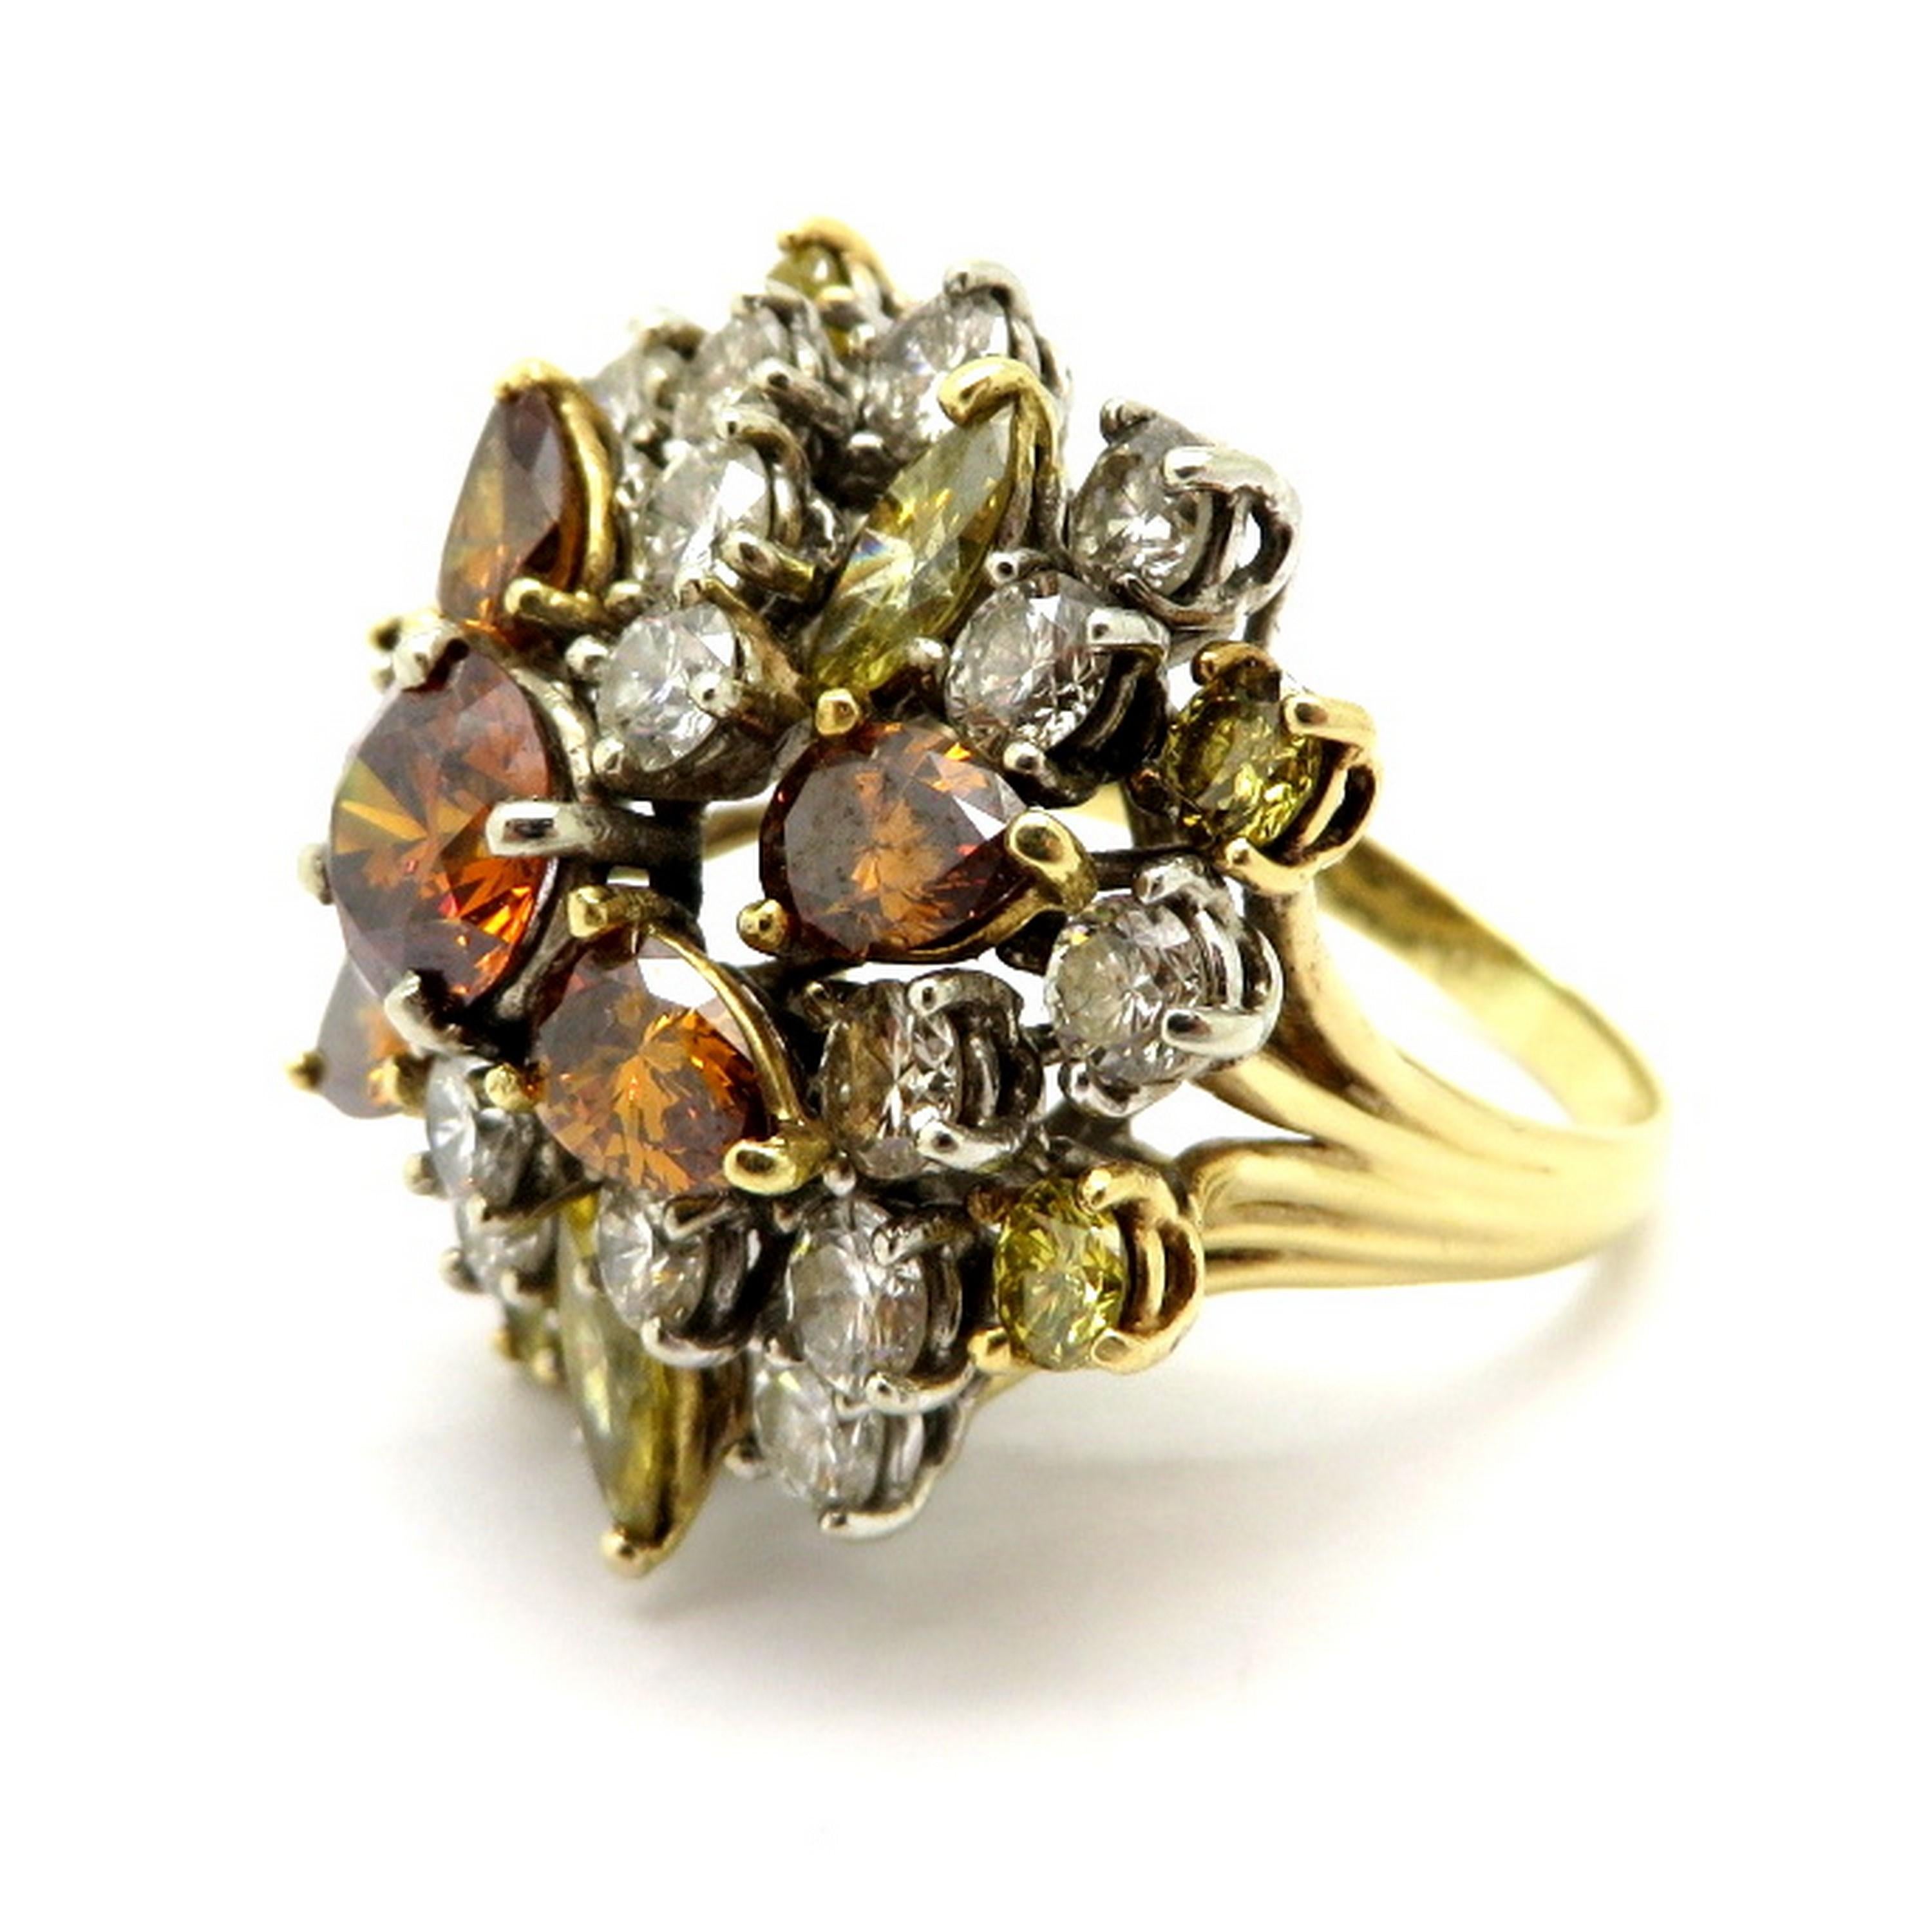 GIA certified 18K two-tone estate fancy brown and yellow diamond cluster cocktail ring. Showcasing one GIA certified fancy deep brownish orange round brilliant cut treated diamond weighing approximately 1.10 carats, having VS2 clarity. Accented with